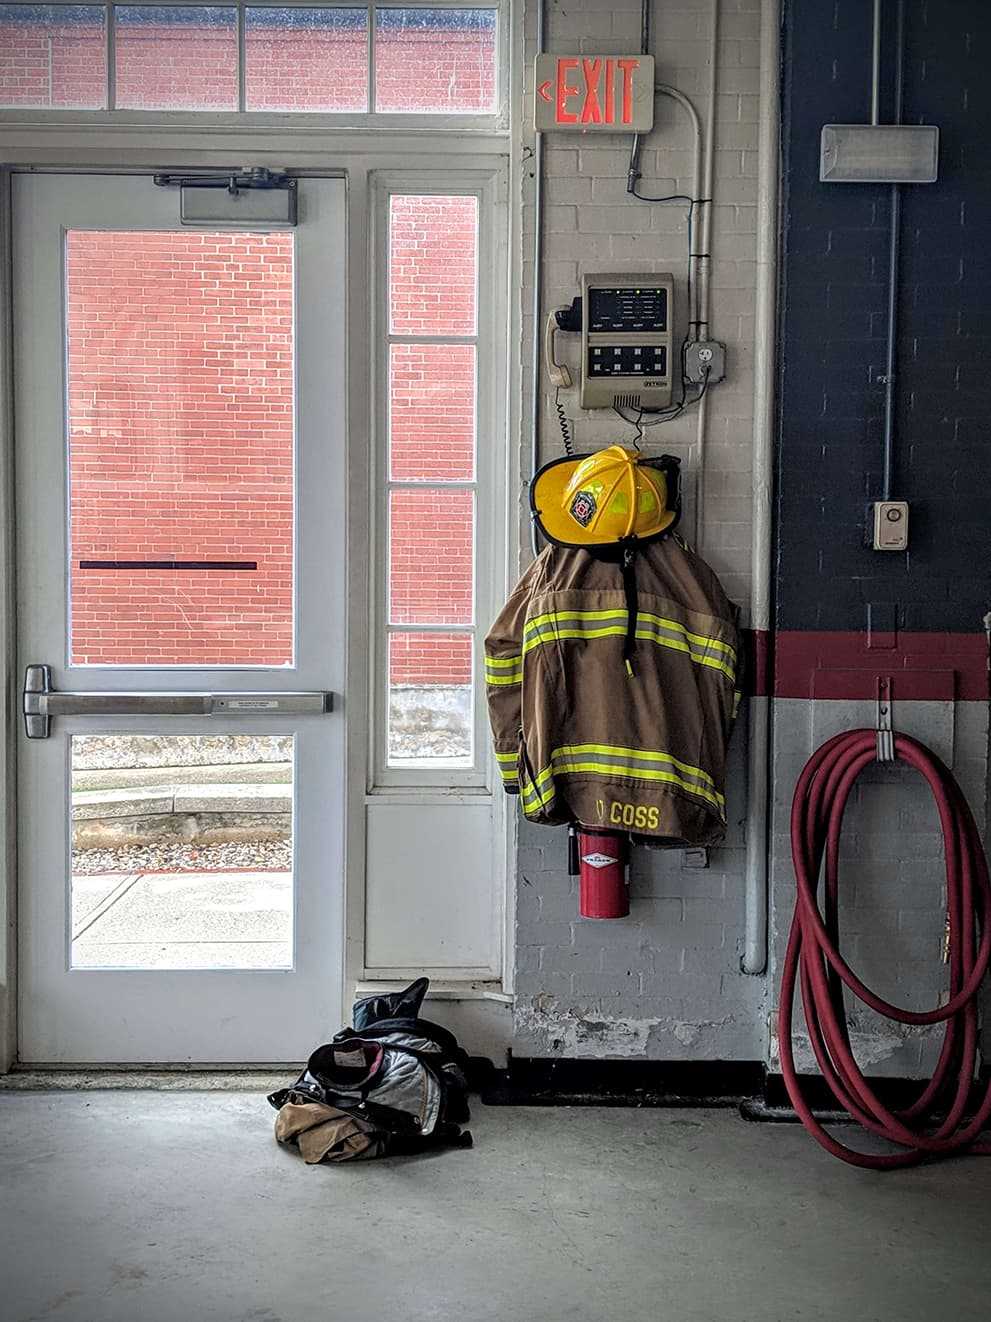 WFD firefighter gear hanging on a hook